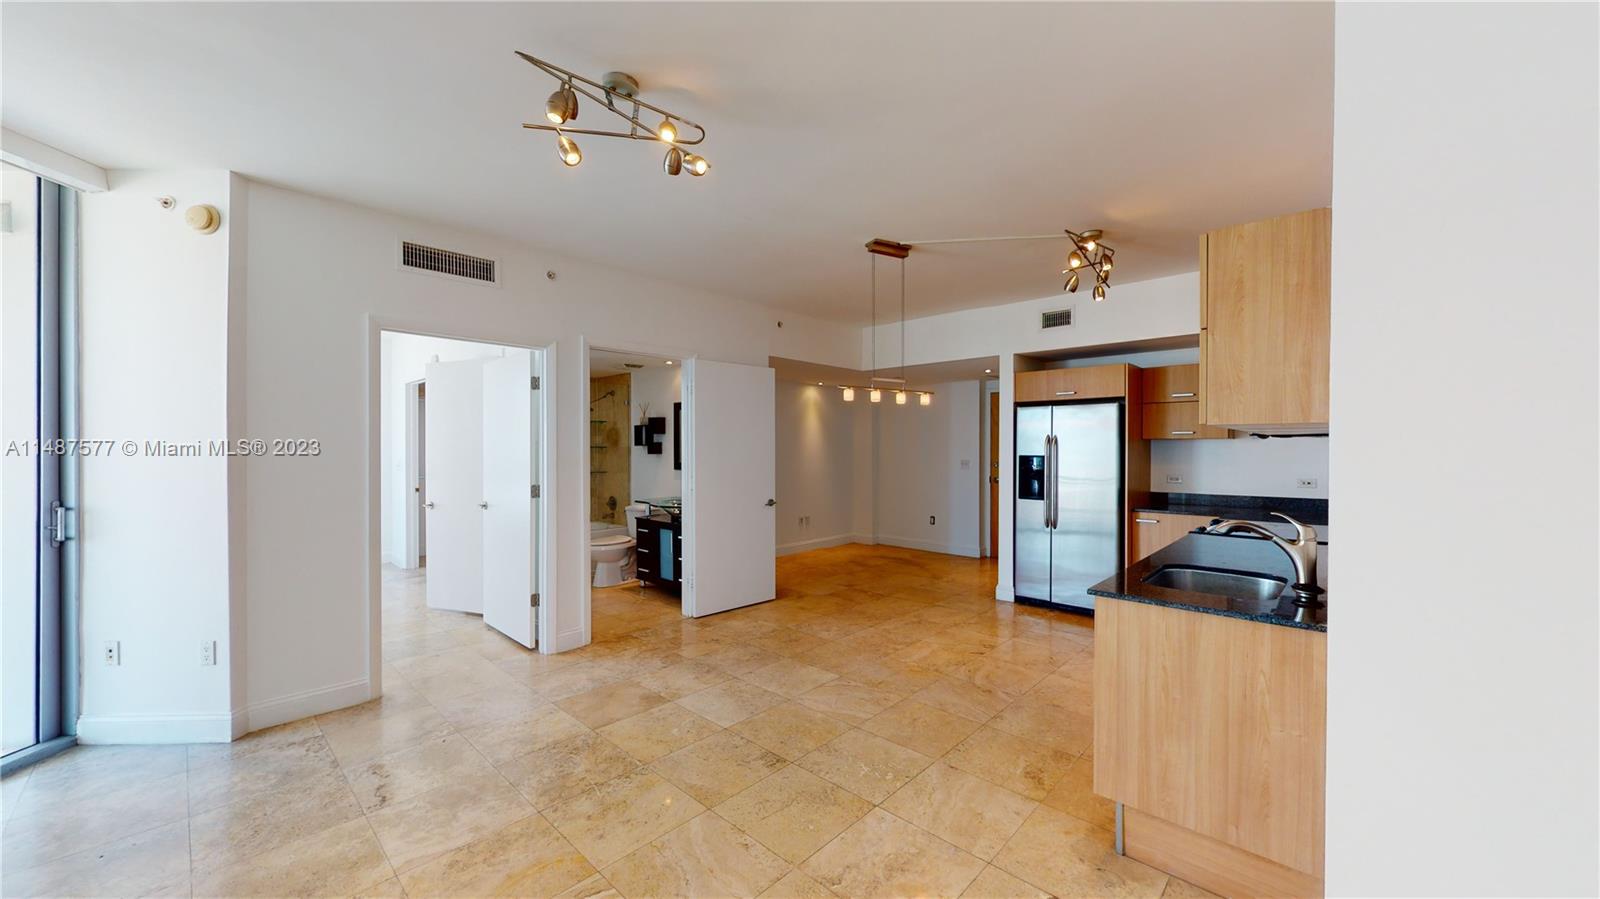 Largest 1 bed 1 bath, Beautiful unit with European kitchen, granite countertop, stainless steel appliances, marble floors throughout, large balcony. Smart Thermostat, remote-controlled Ceiling fan, Walking distance to Metromover, Brickell city center, Brickell financial district, and Merry Brickell Village. Building amenities include 24-hour concierge service, steam, sauna, and massage rooms, racquetball court, state of the art 2-story gym, infinity-edge pool, hot tub, billiards, spectacular 2 level Event and Party lounge overlooking the Miami River and Downtown Brickell, Business center with conference area, Children's room, Valet Parking, and more much more. Water, Cable, and Internet included. Living room flat TV included in the listing. 1 assigned parking.